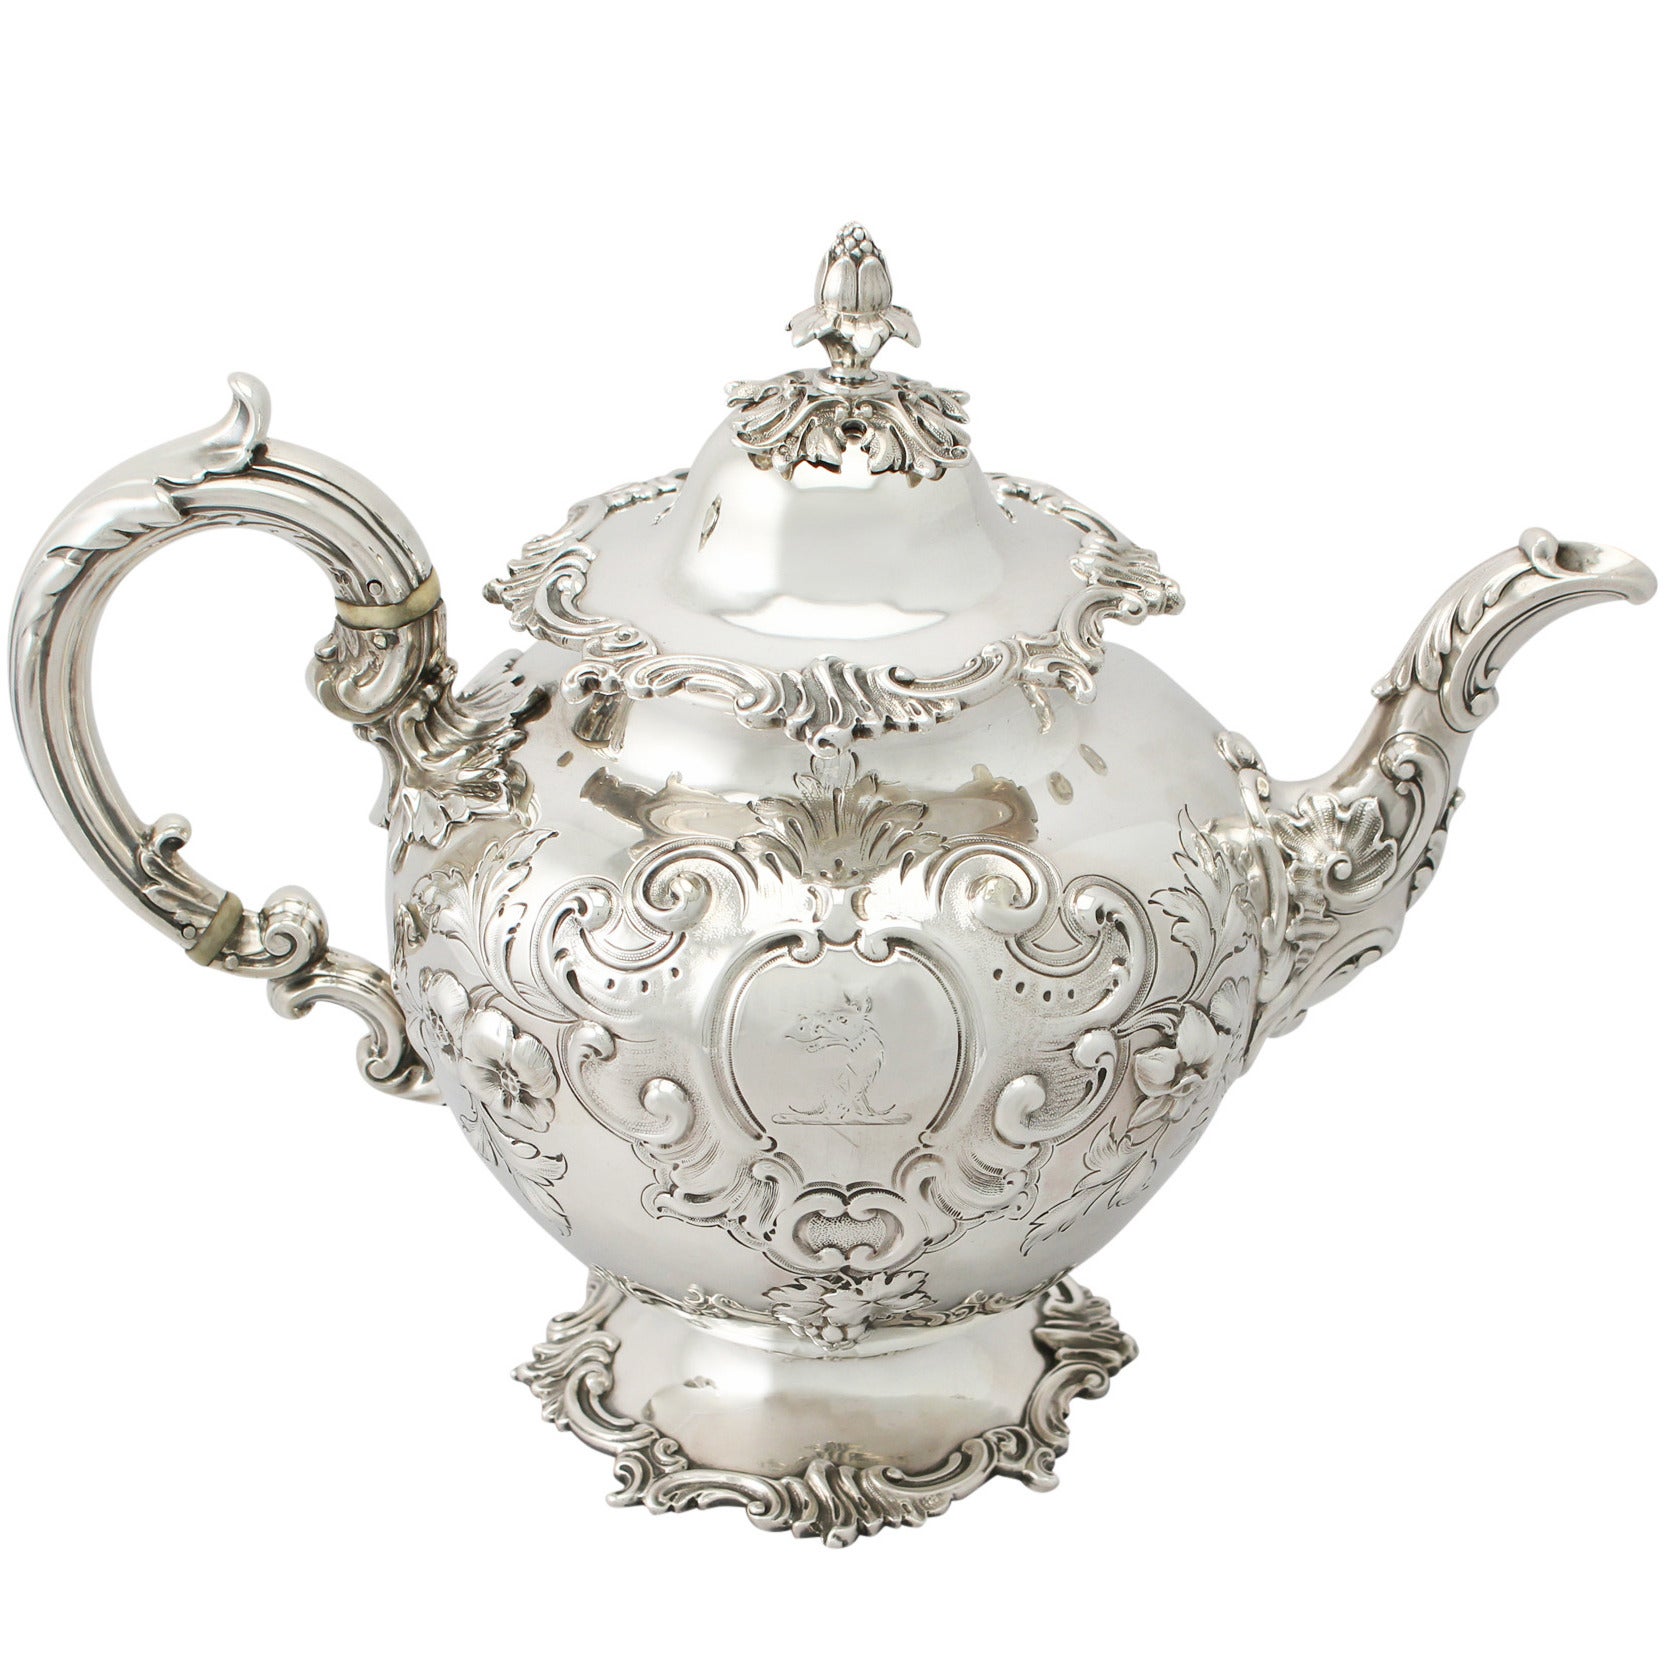 Antique Victorian Sterling Silver Teapot by Edward and John Barnard